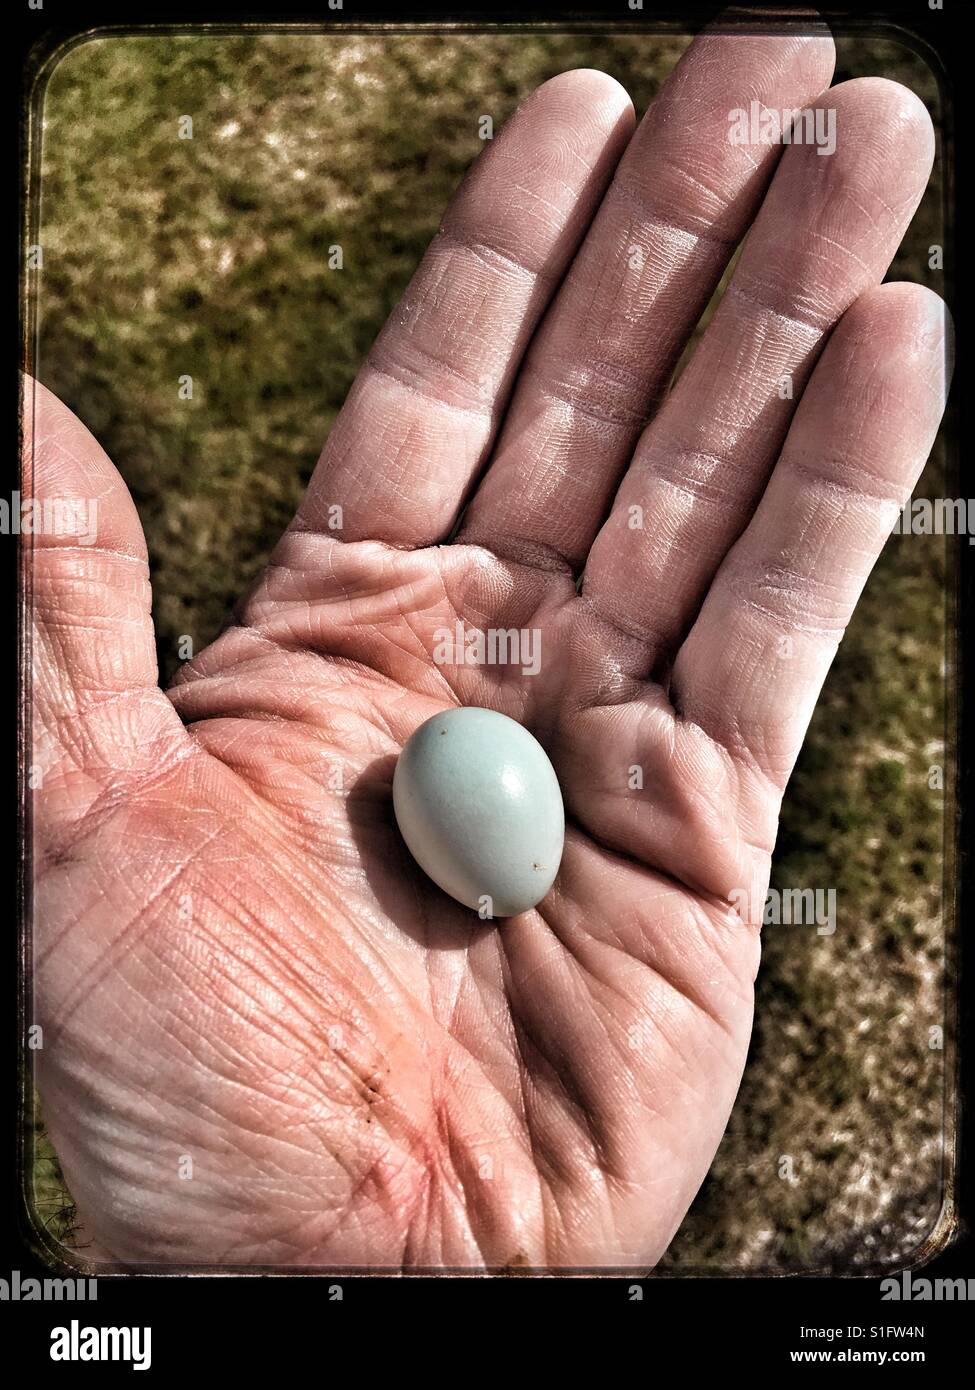 Starling Egg found on Garden lawn. Stock Photo